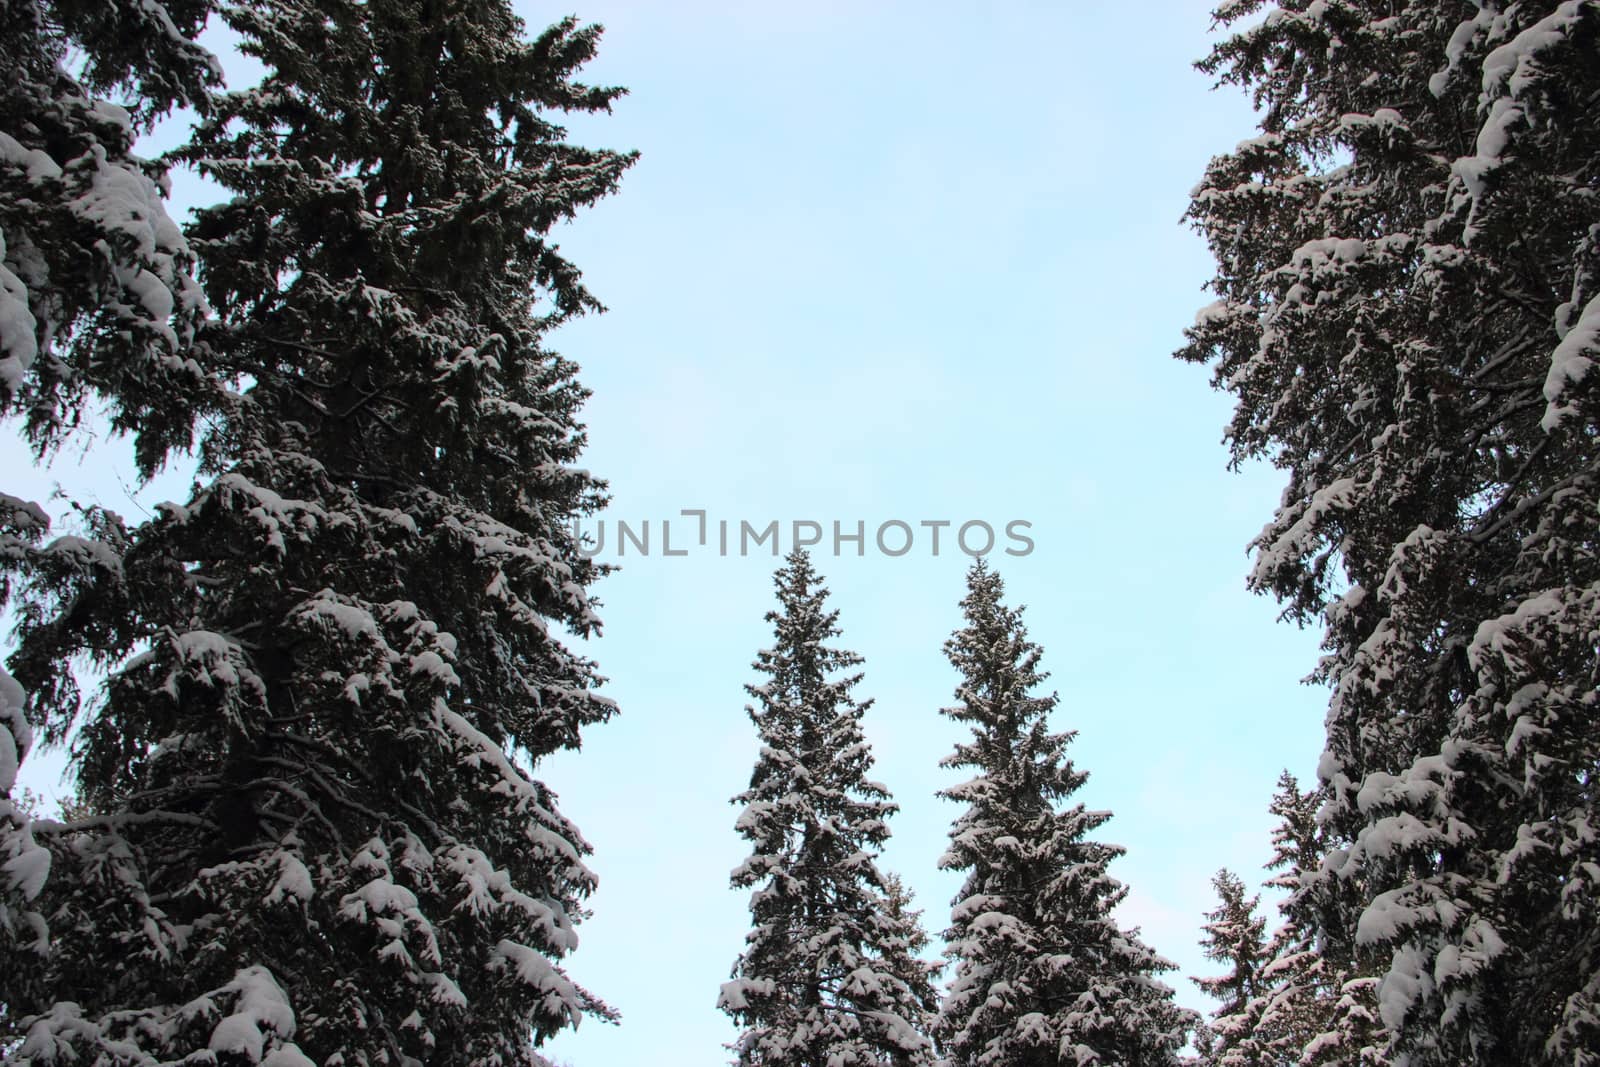 A view of the top of large fir trees in the blue sky in winter